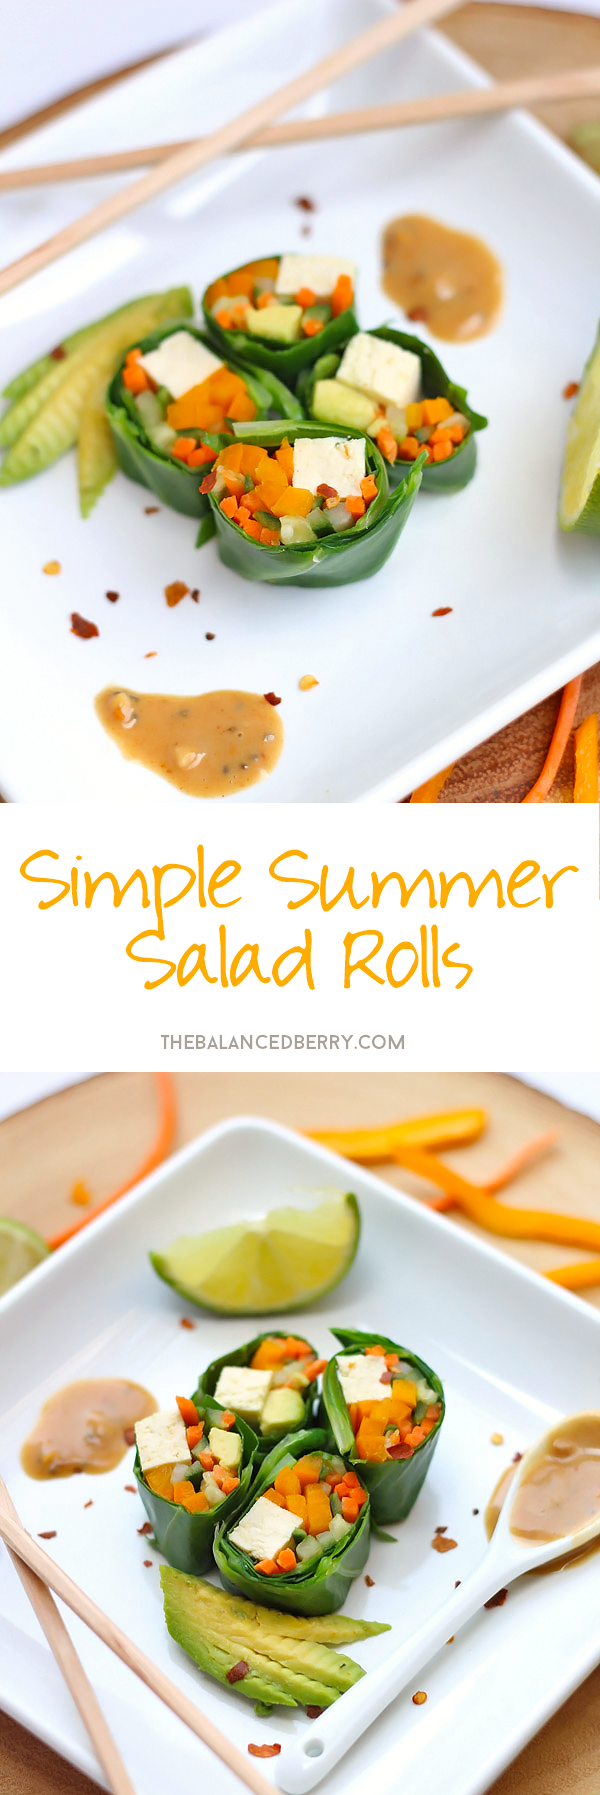 Simple Summer Salad Rolls - delicious, customizable salad rolls using ingredients you have on hand!